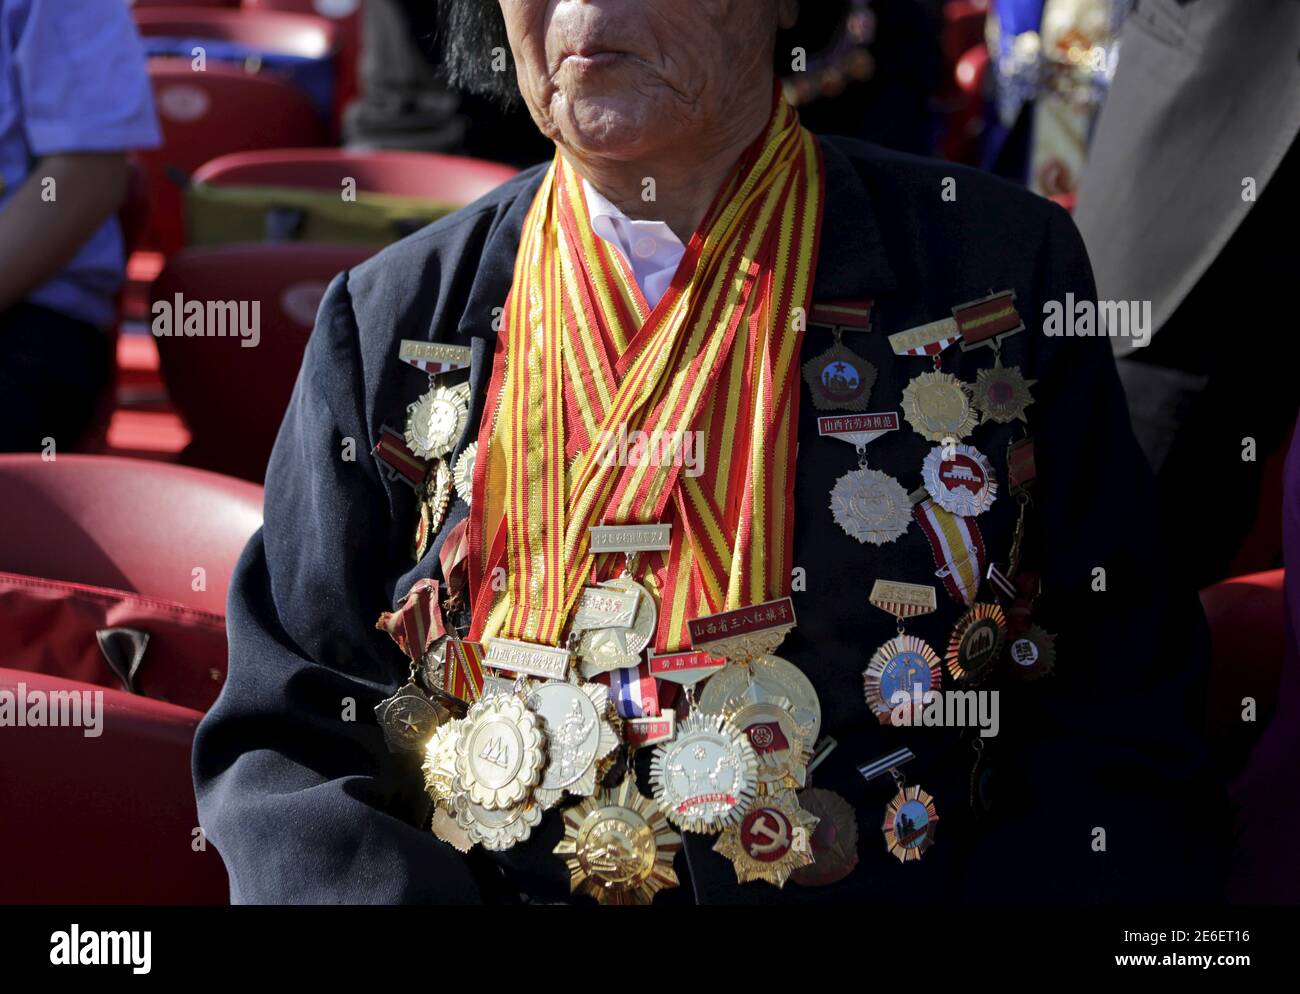 Shen Jilan wearing insignias and medals sits, ahead of the military parade to mark the 70th anniversary of the end of World War Two, in Beijing, China, September 3, 2015. Shen, 85, is the only person in China to be elected 12 consecutive times as a member of China's parliament, after she was appointed to China's first National People's Congress (NPC) in 1954, according to local media. REUTERS/Jason Lee Stock Photo